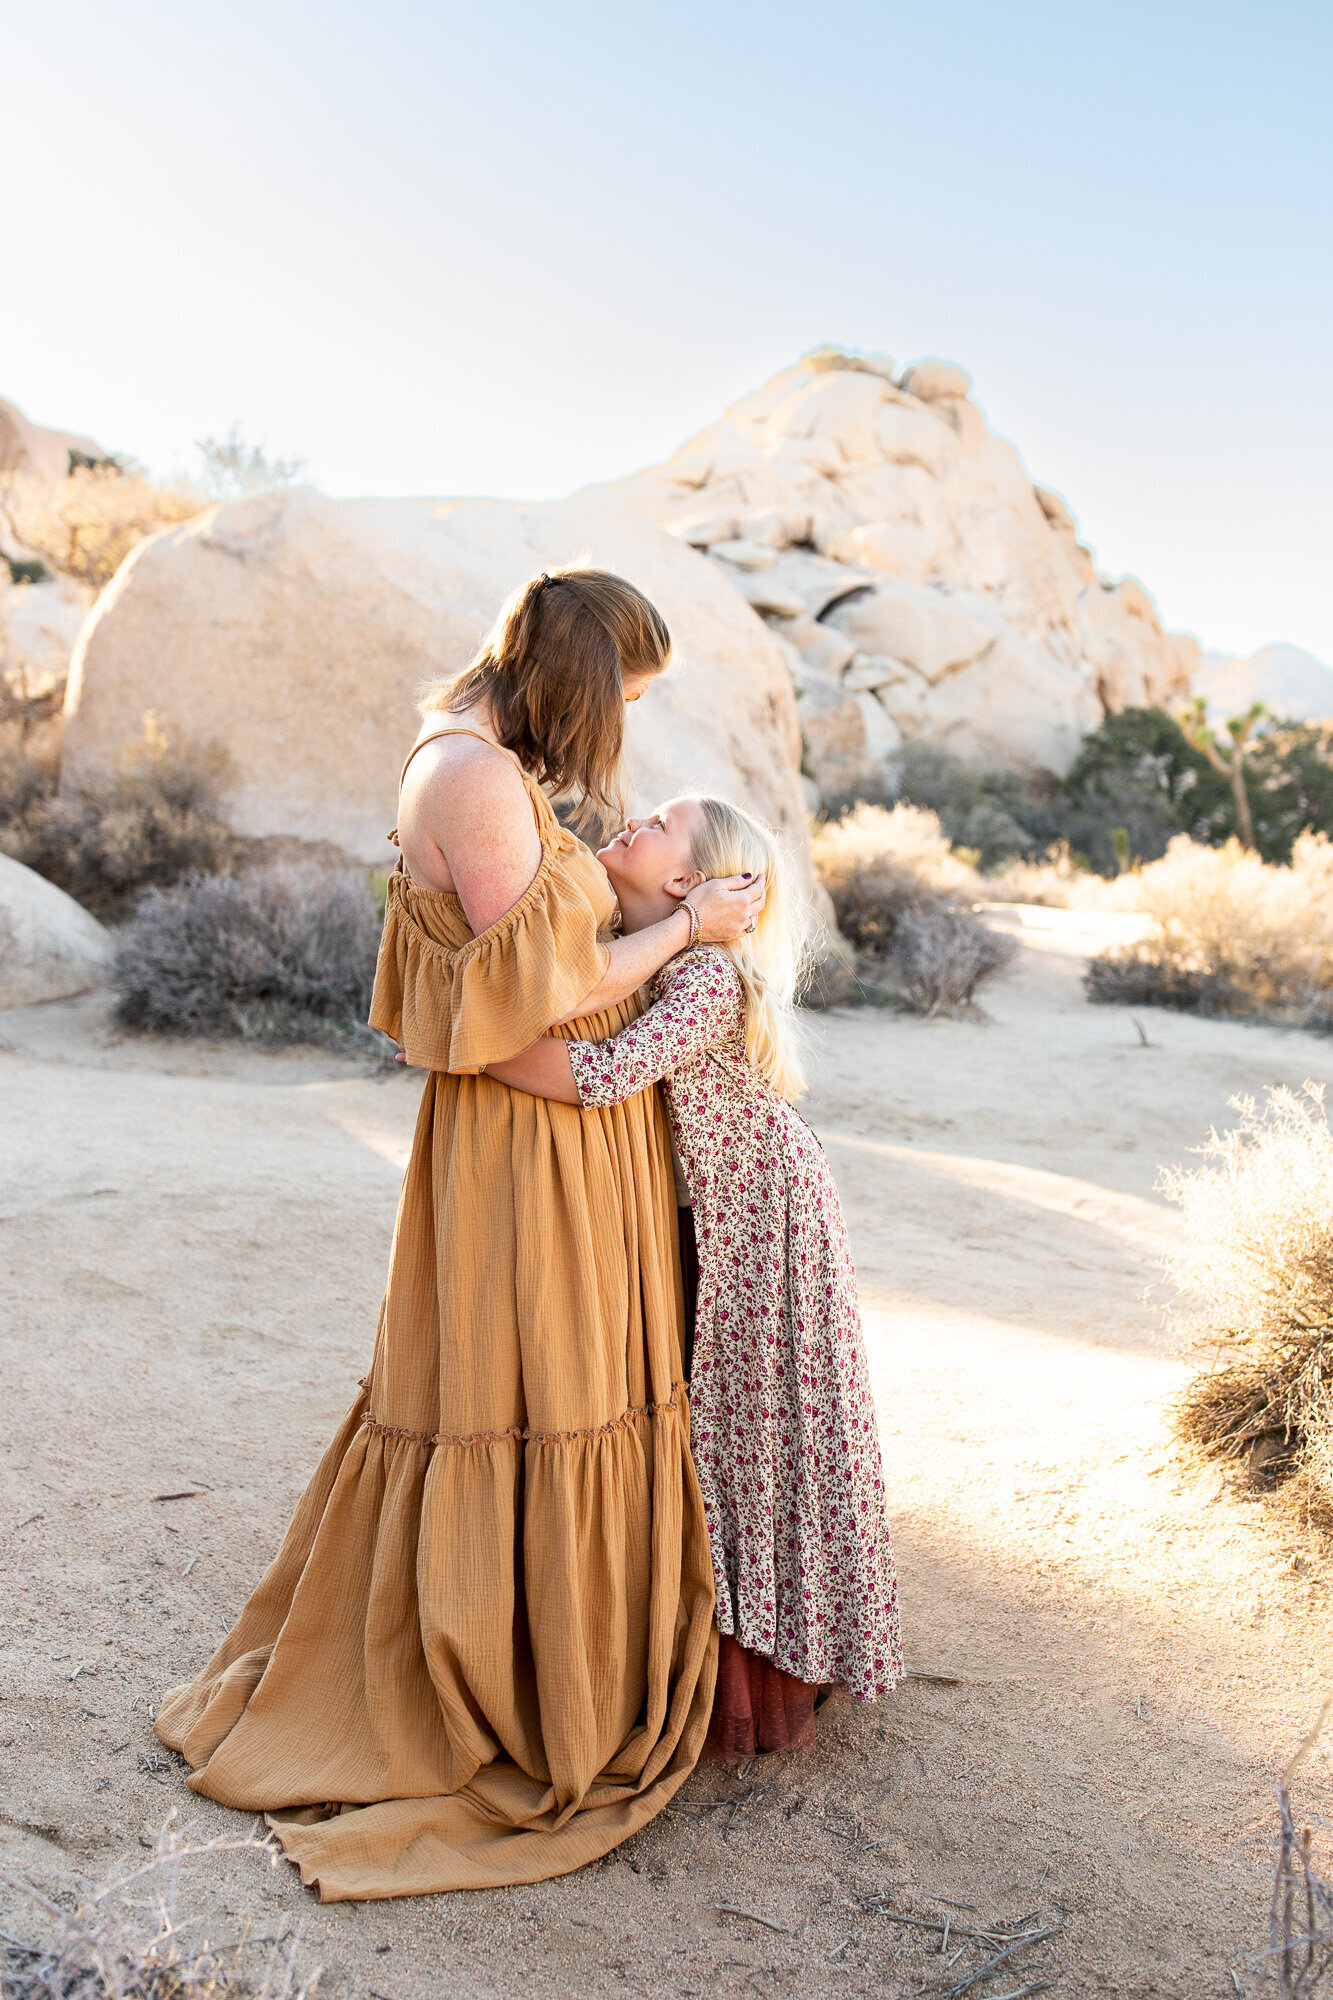 Mom and daughter looking at one another a beautiful Joshua Tree photo spot.